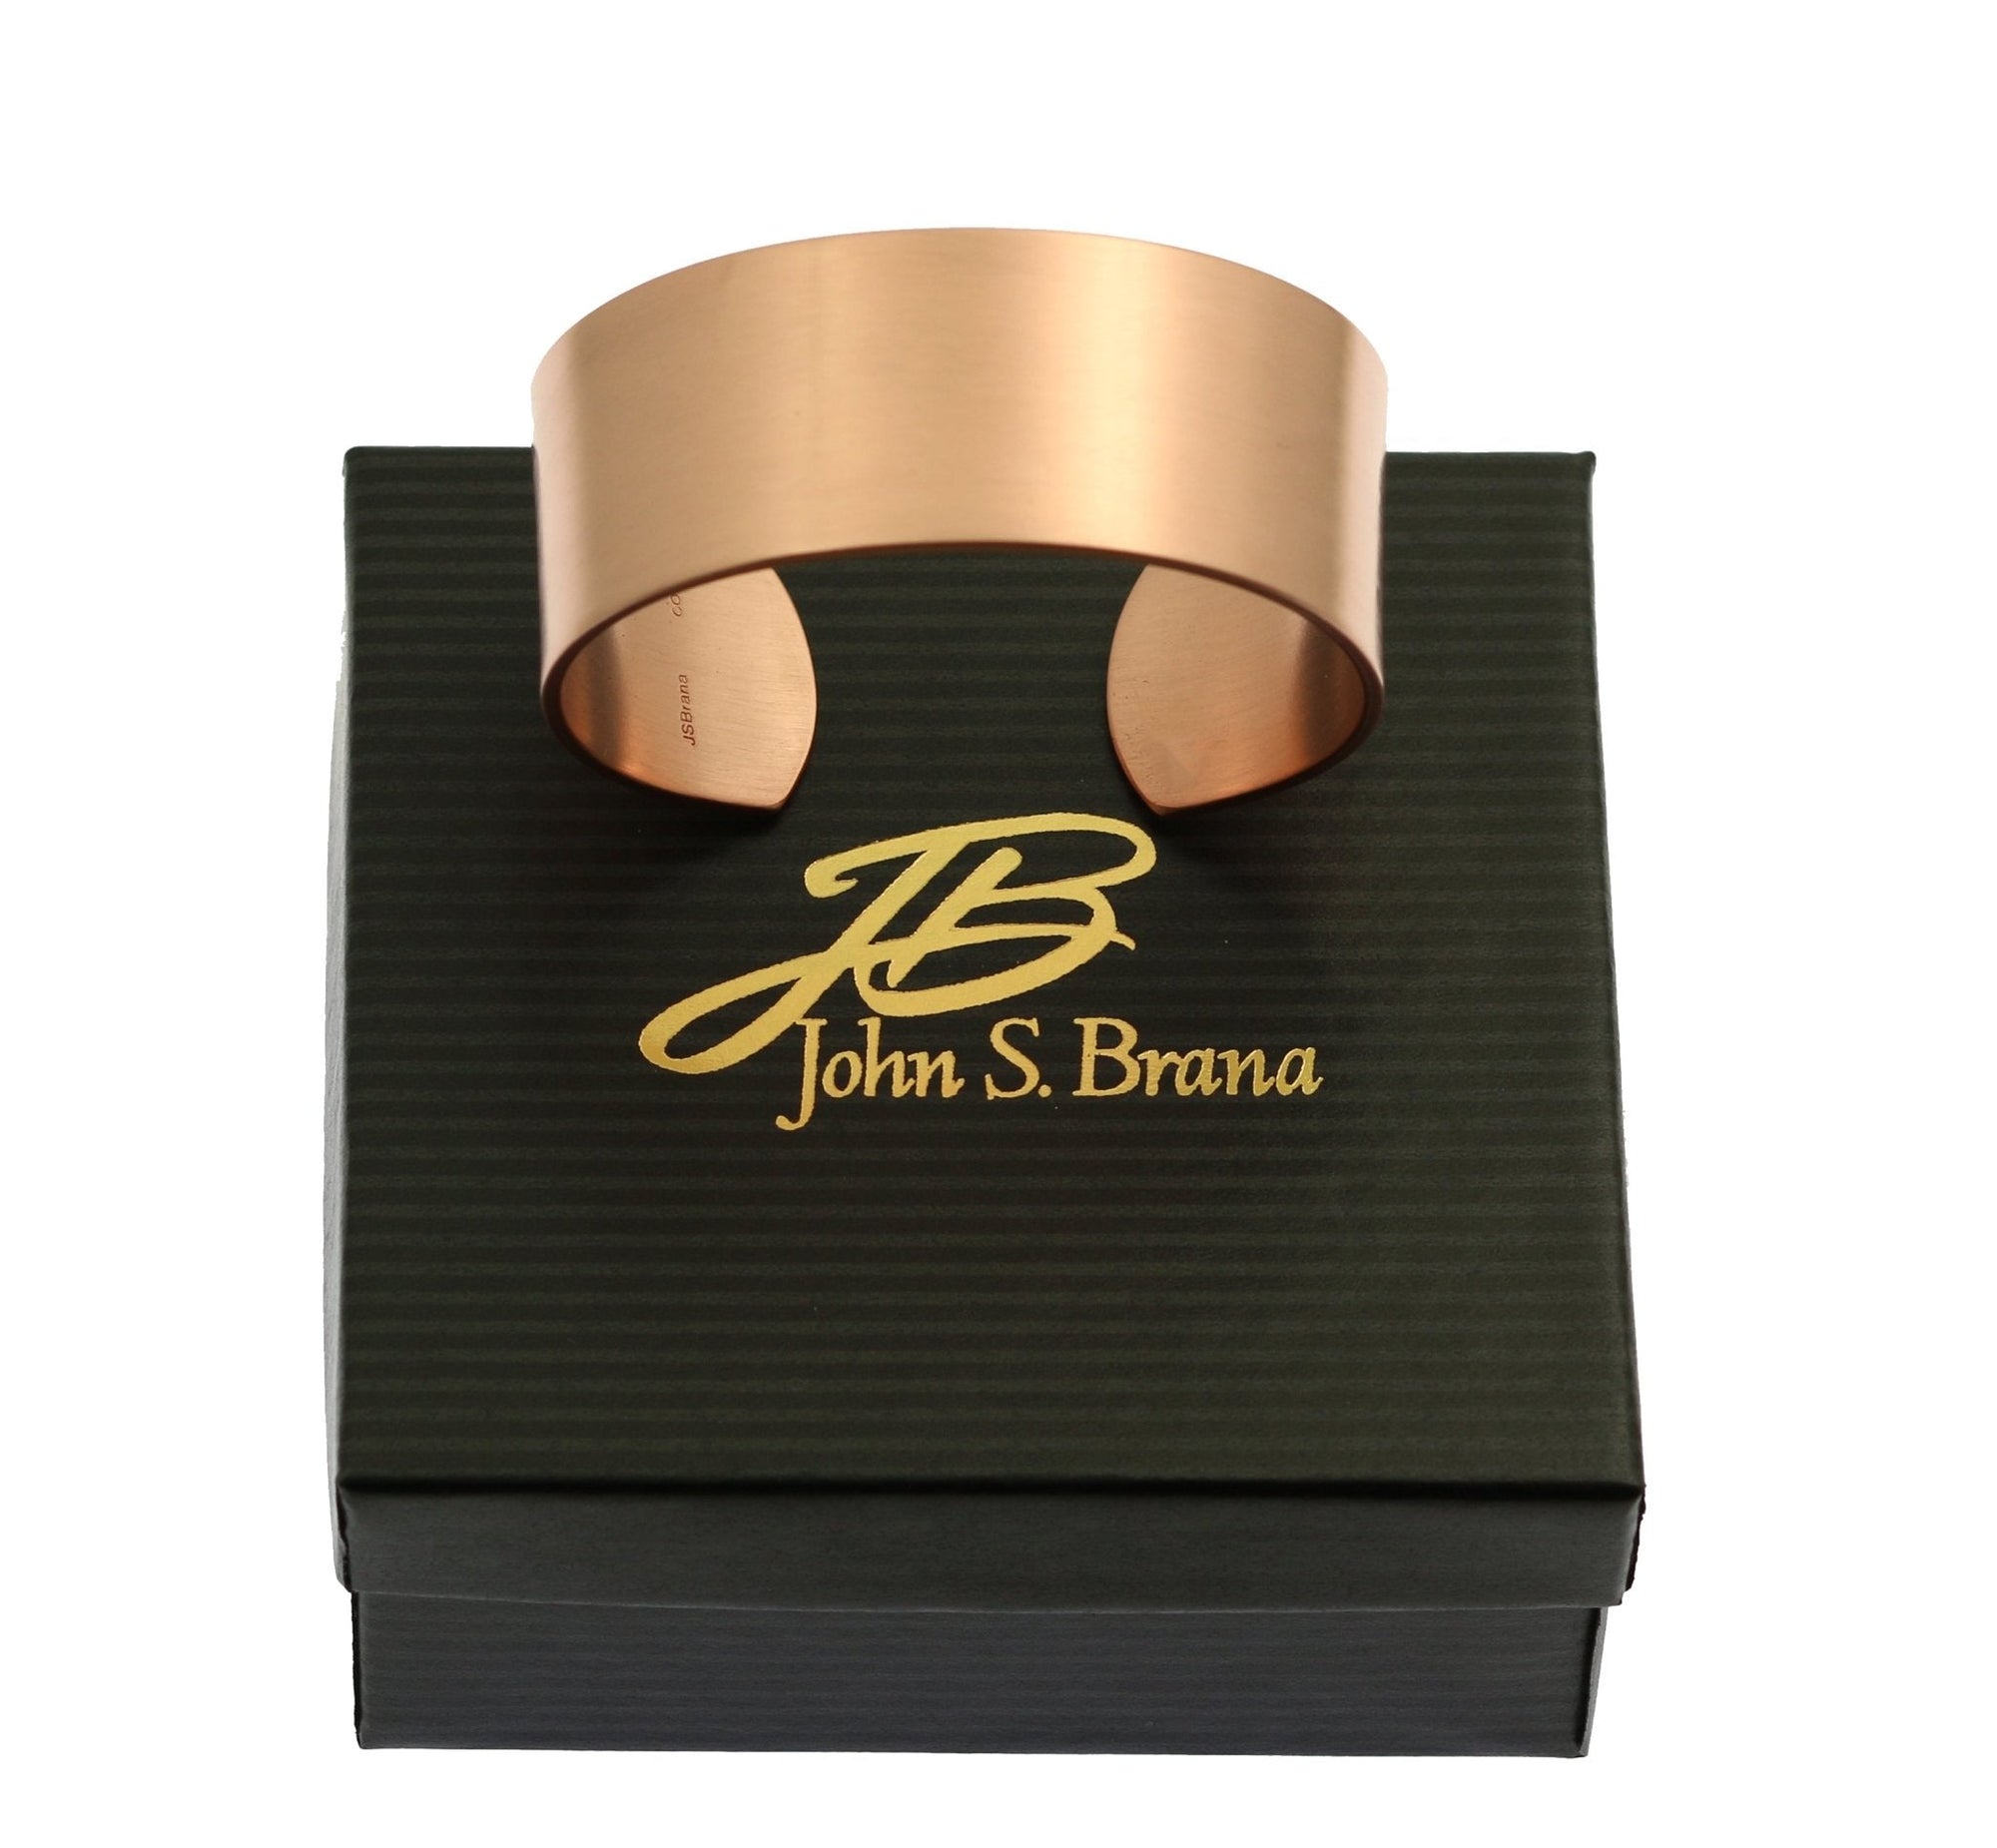 1 Inch Wide Brushed Copper Cuff Bracelet with Black Gift Box